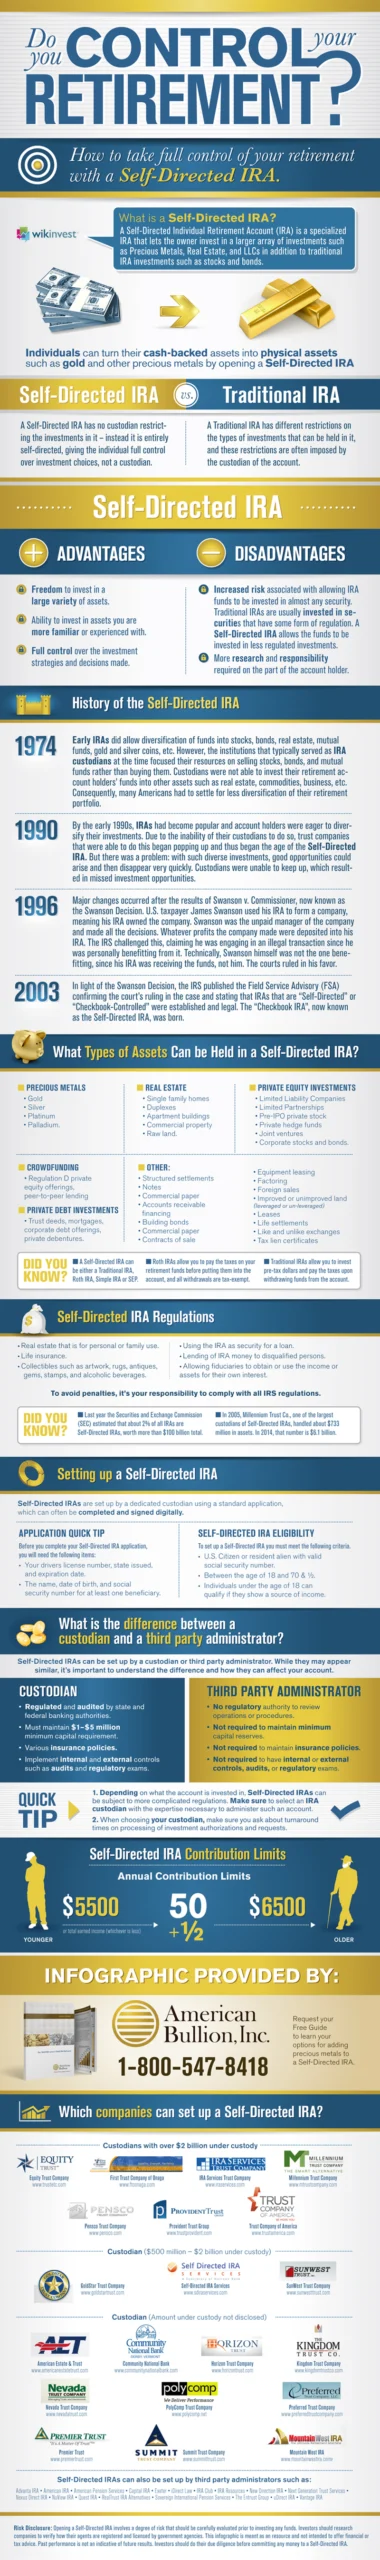 Self-Directed IRA To Control Your Retirement [InfoGraphic]
